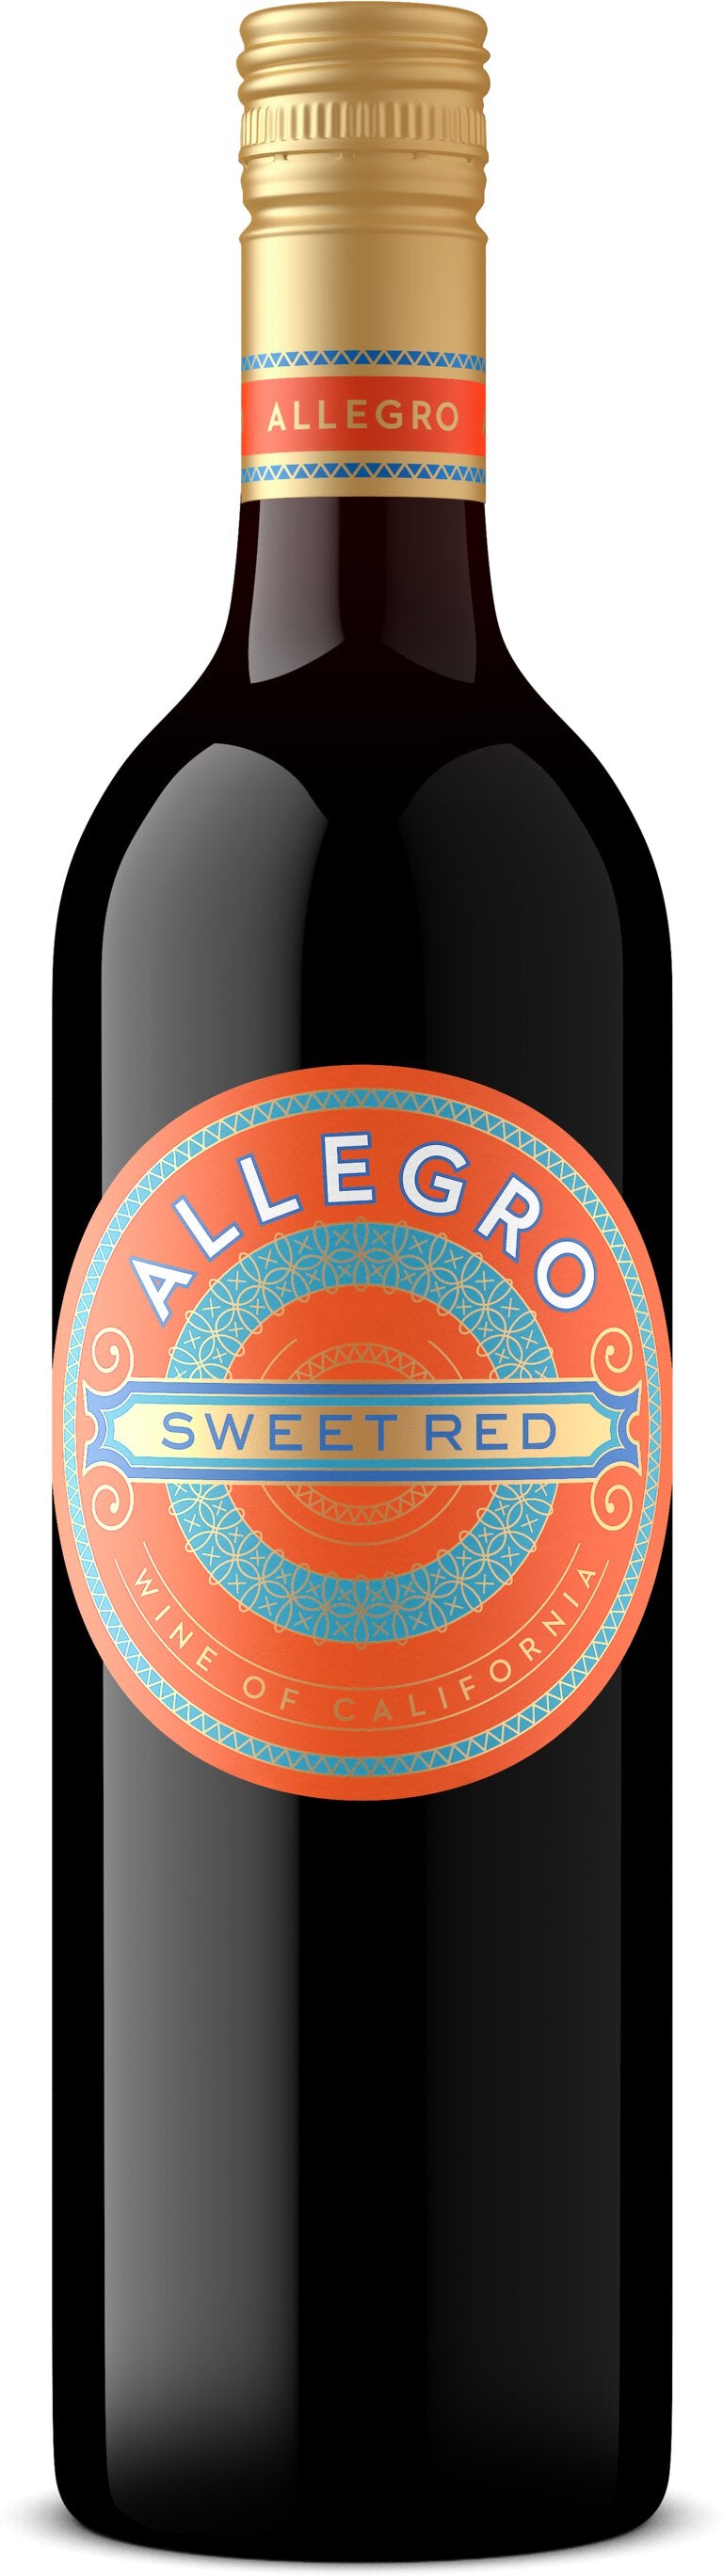 Allegro Swt Red